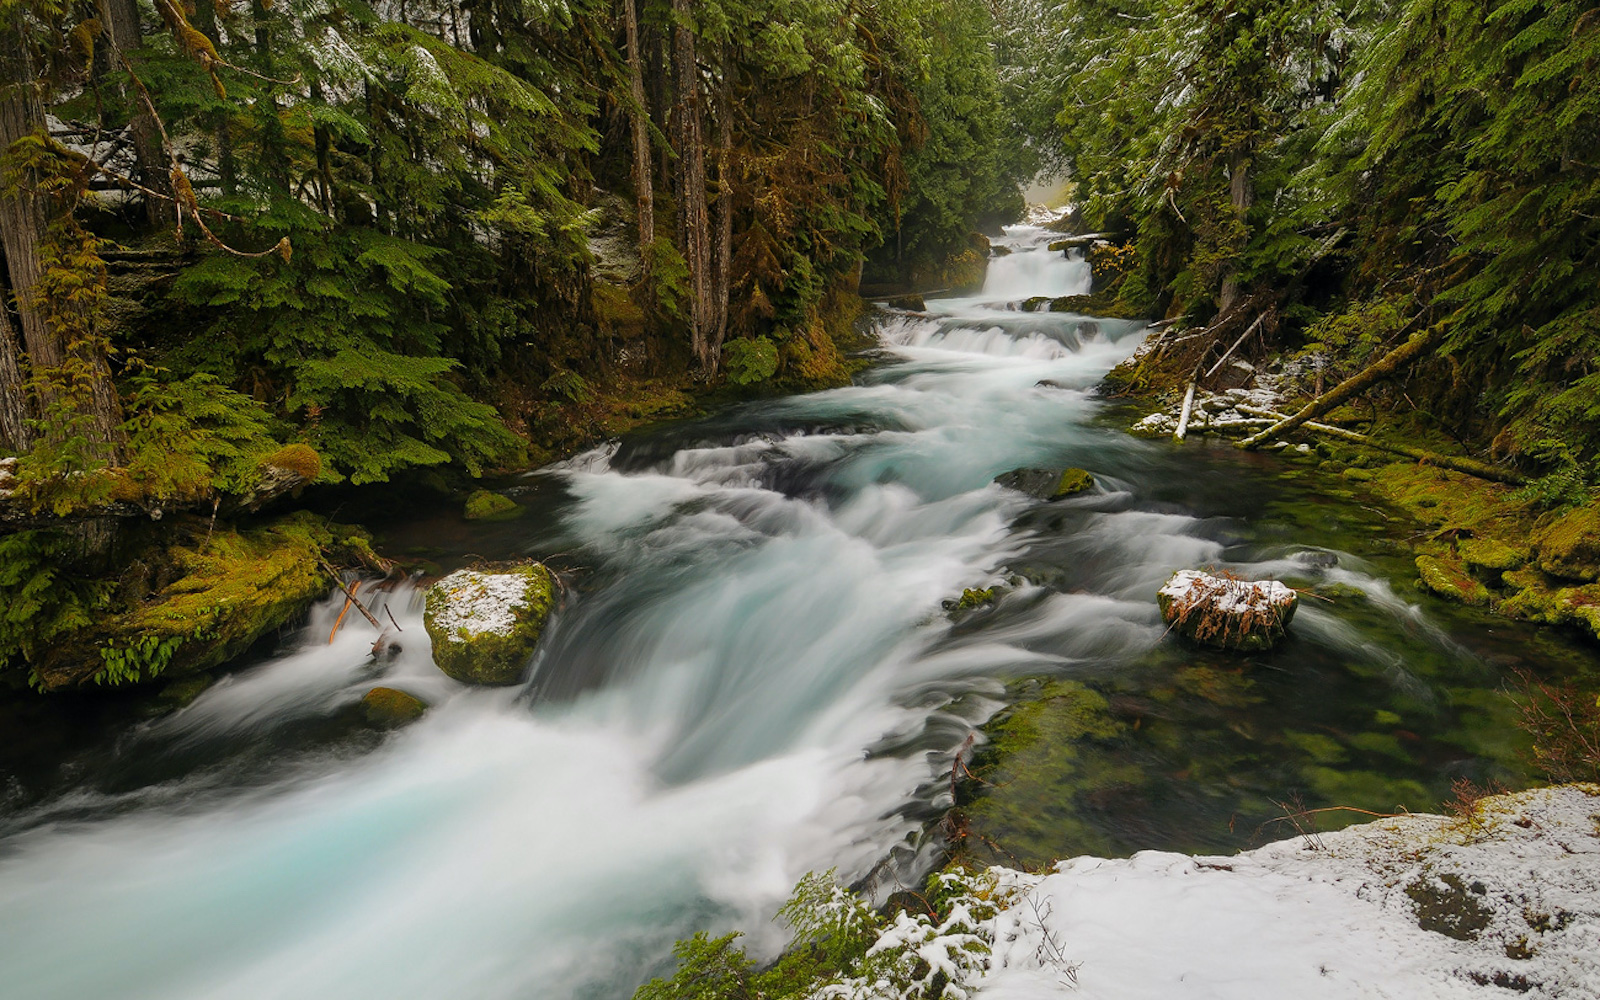 Press Release: Eugene Water and Electric Board’s Unanimously Votes to Decommission Leaburg Hydroelectric Project on the McKenzie River